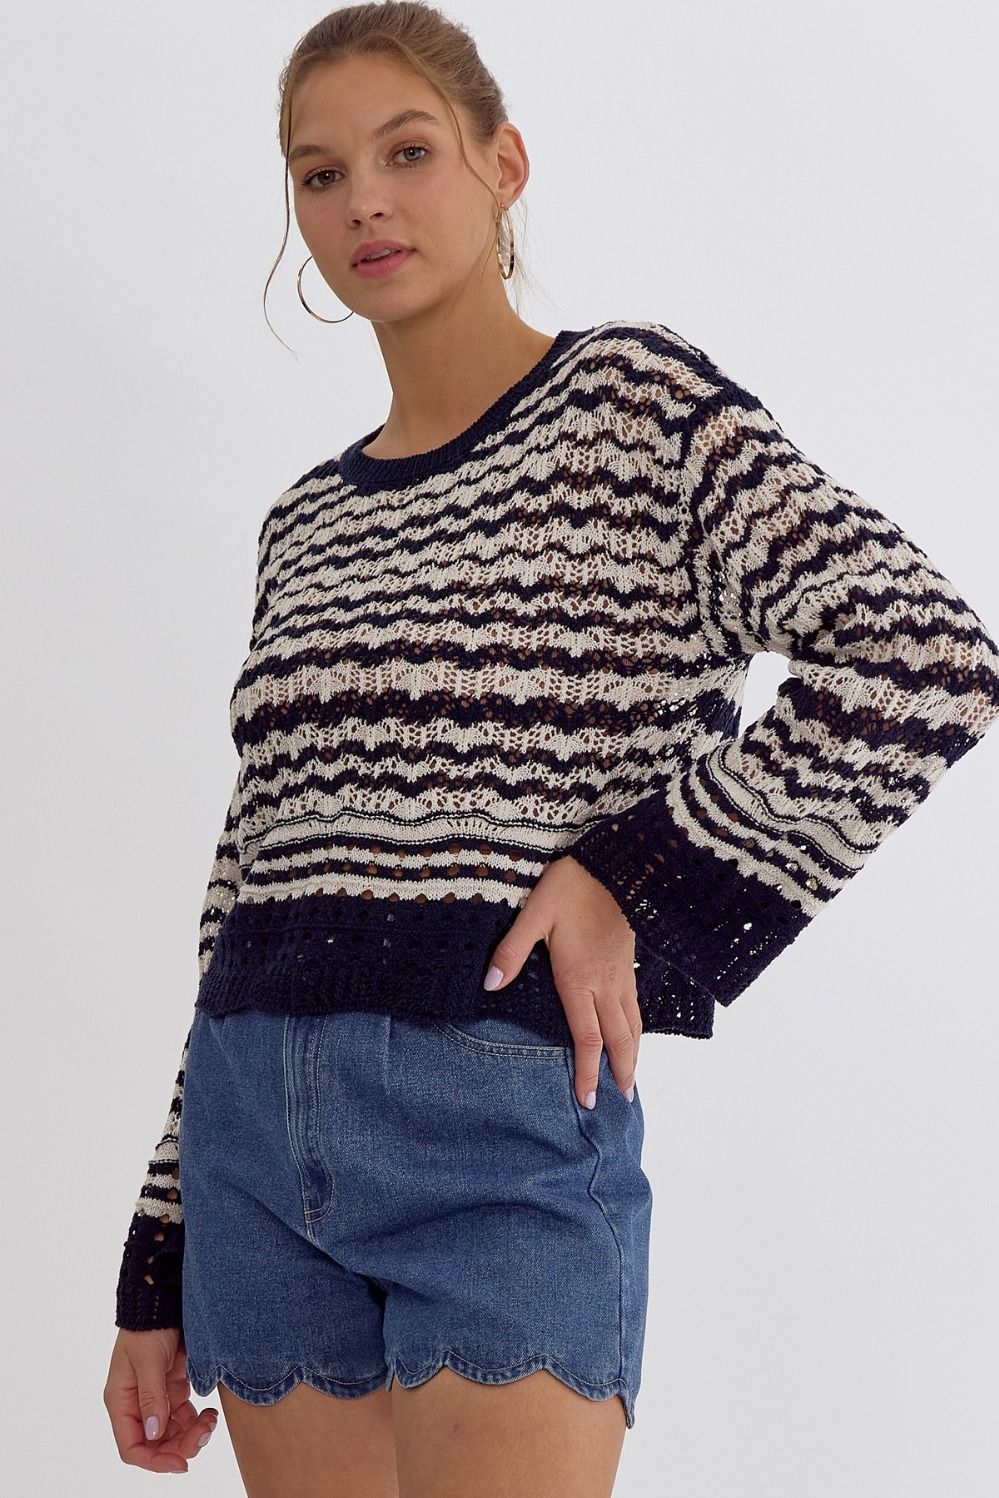 ENTRO INC Women's Sweaters NAVY / S Crochet Striped Sweater || David's Clothing T22711